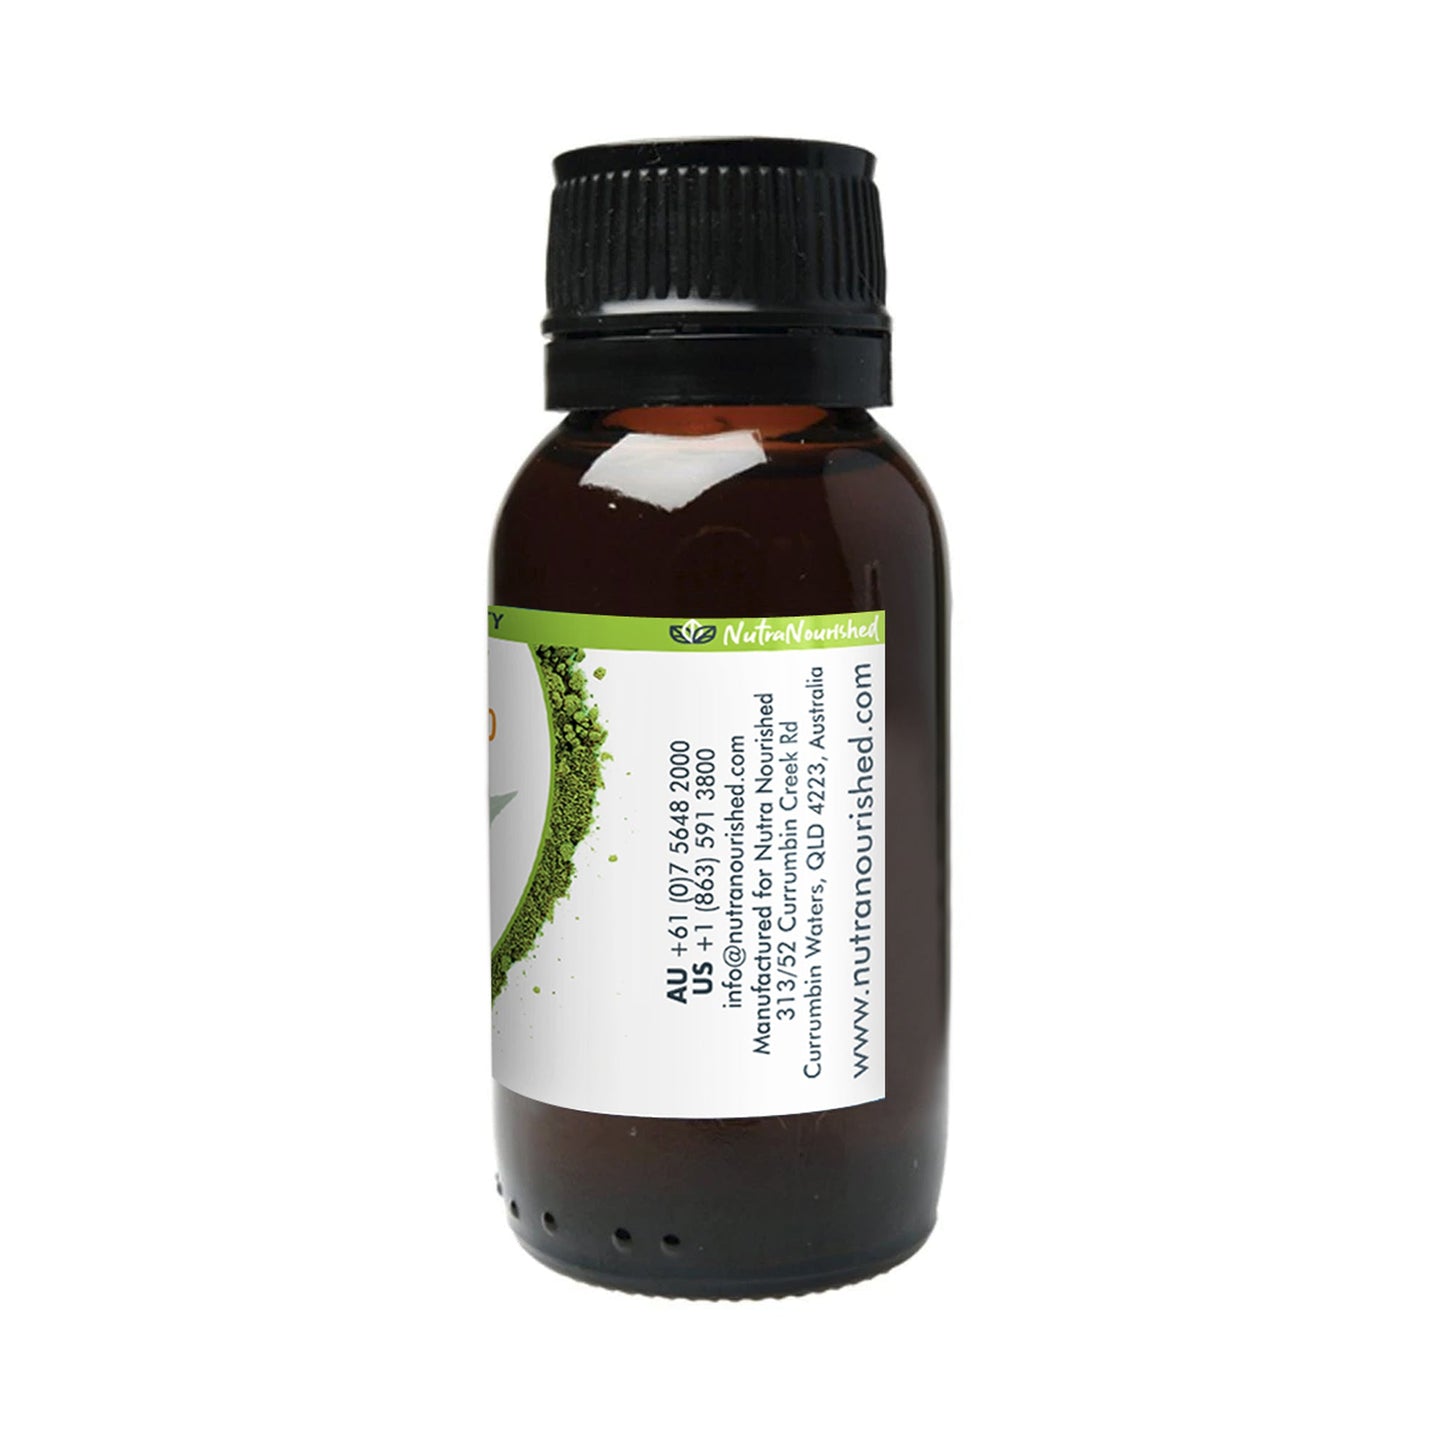 Light Gray Nutra Nourished Neem Seed Oil Organic Pure Natural 50ml